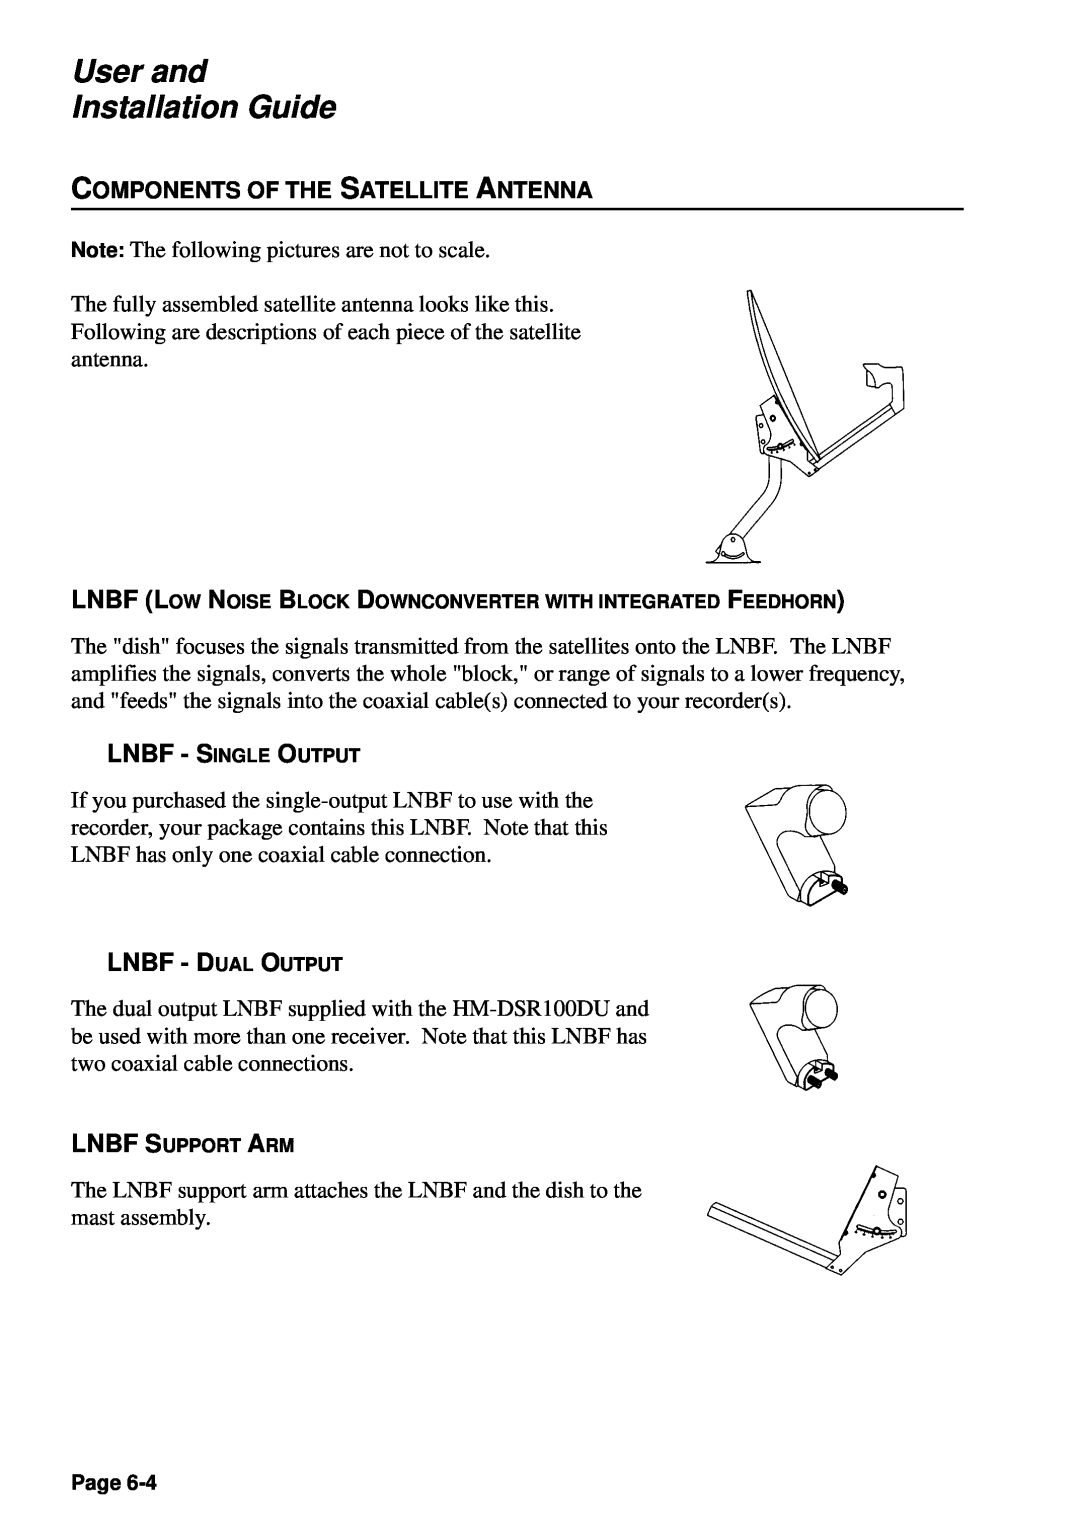 JVC HM-DSR100RU manual Lnbf - Dual Output, User and Installation Guide, Components Of The Satellite Antenna 